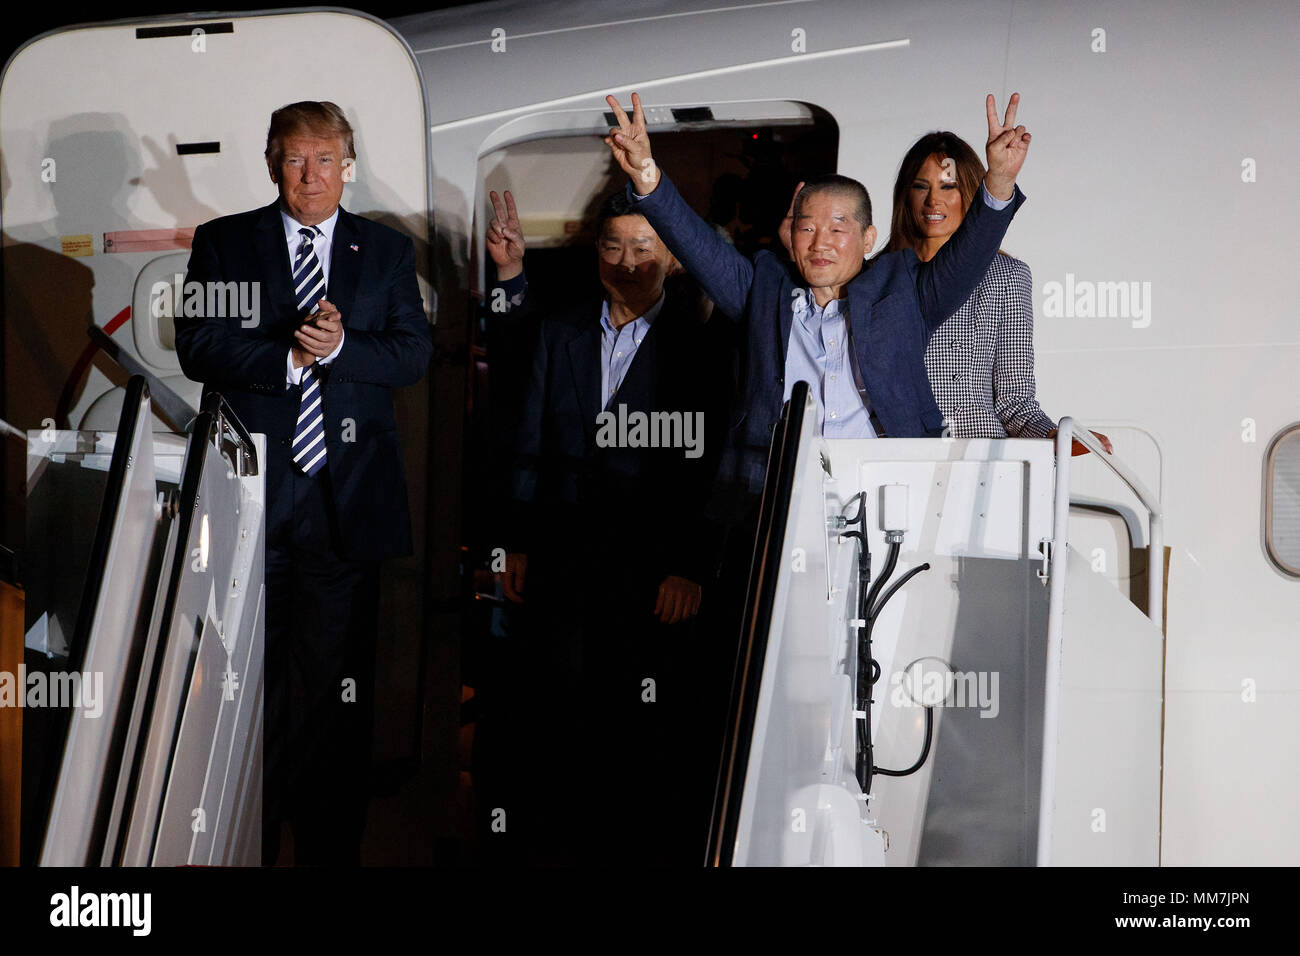 (180510) -- WASHINGTON D.C., May 10, 2018 (Xinhua) -- U.S. President Donald Trump (1st L), his wife Melania Trump (1st R) welcome Kim Dong-chul, Kim Hak-song and Tony Kim back to the United States at Joint Base Andrews in Washington, DC, the United States, May 10, 2018. Three U.S. citizens that were just freed by the Democratic People's Republic of Korea (DPRK) arrived in Washington early Thursday, as the two countries saw their ties warm up in recent weeks. The three detainees, named Kim Hak-song, Tony Kim, Kim Dong-chul, are all U.S. citizens of Korean descent. They were arrested by DPRK au Stock Photo